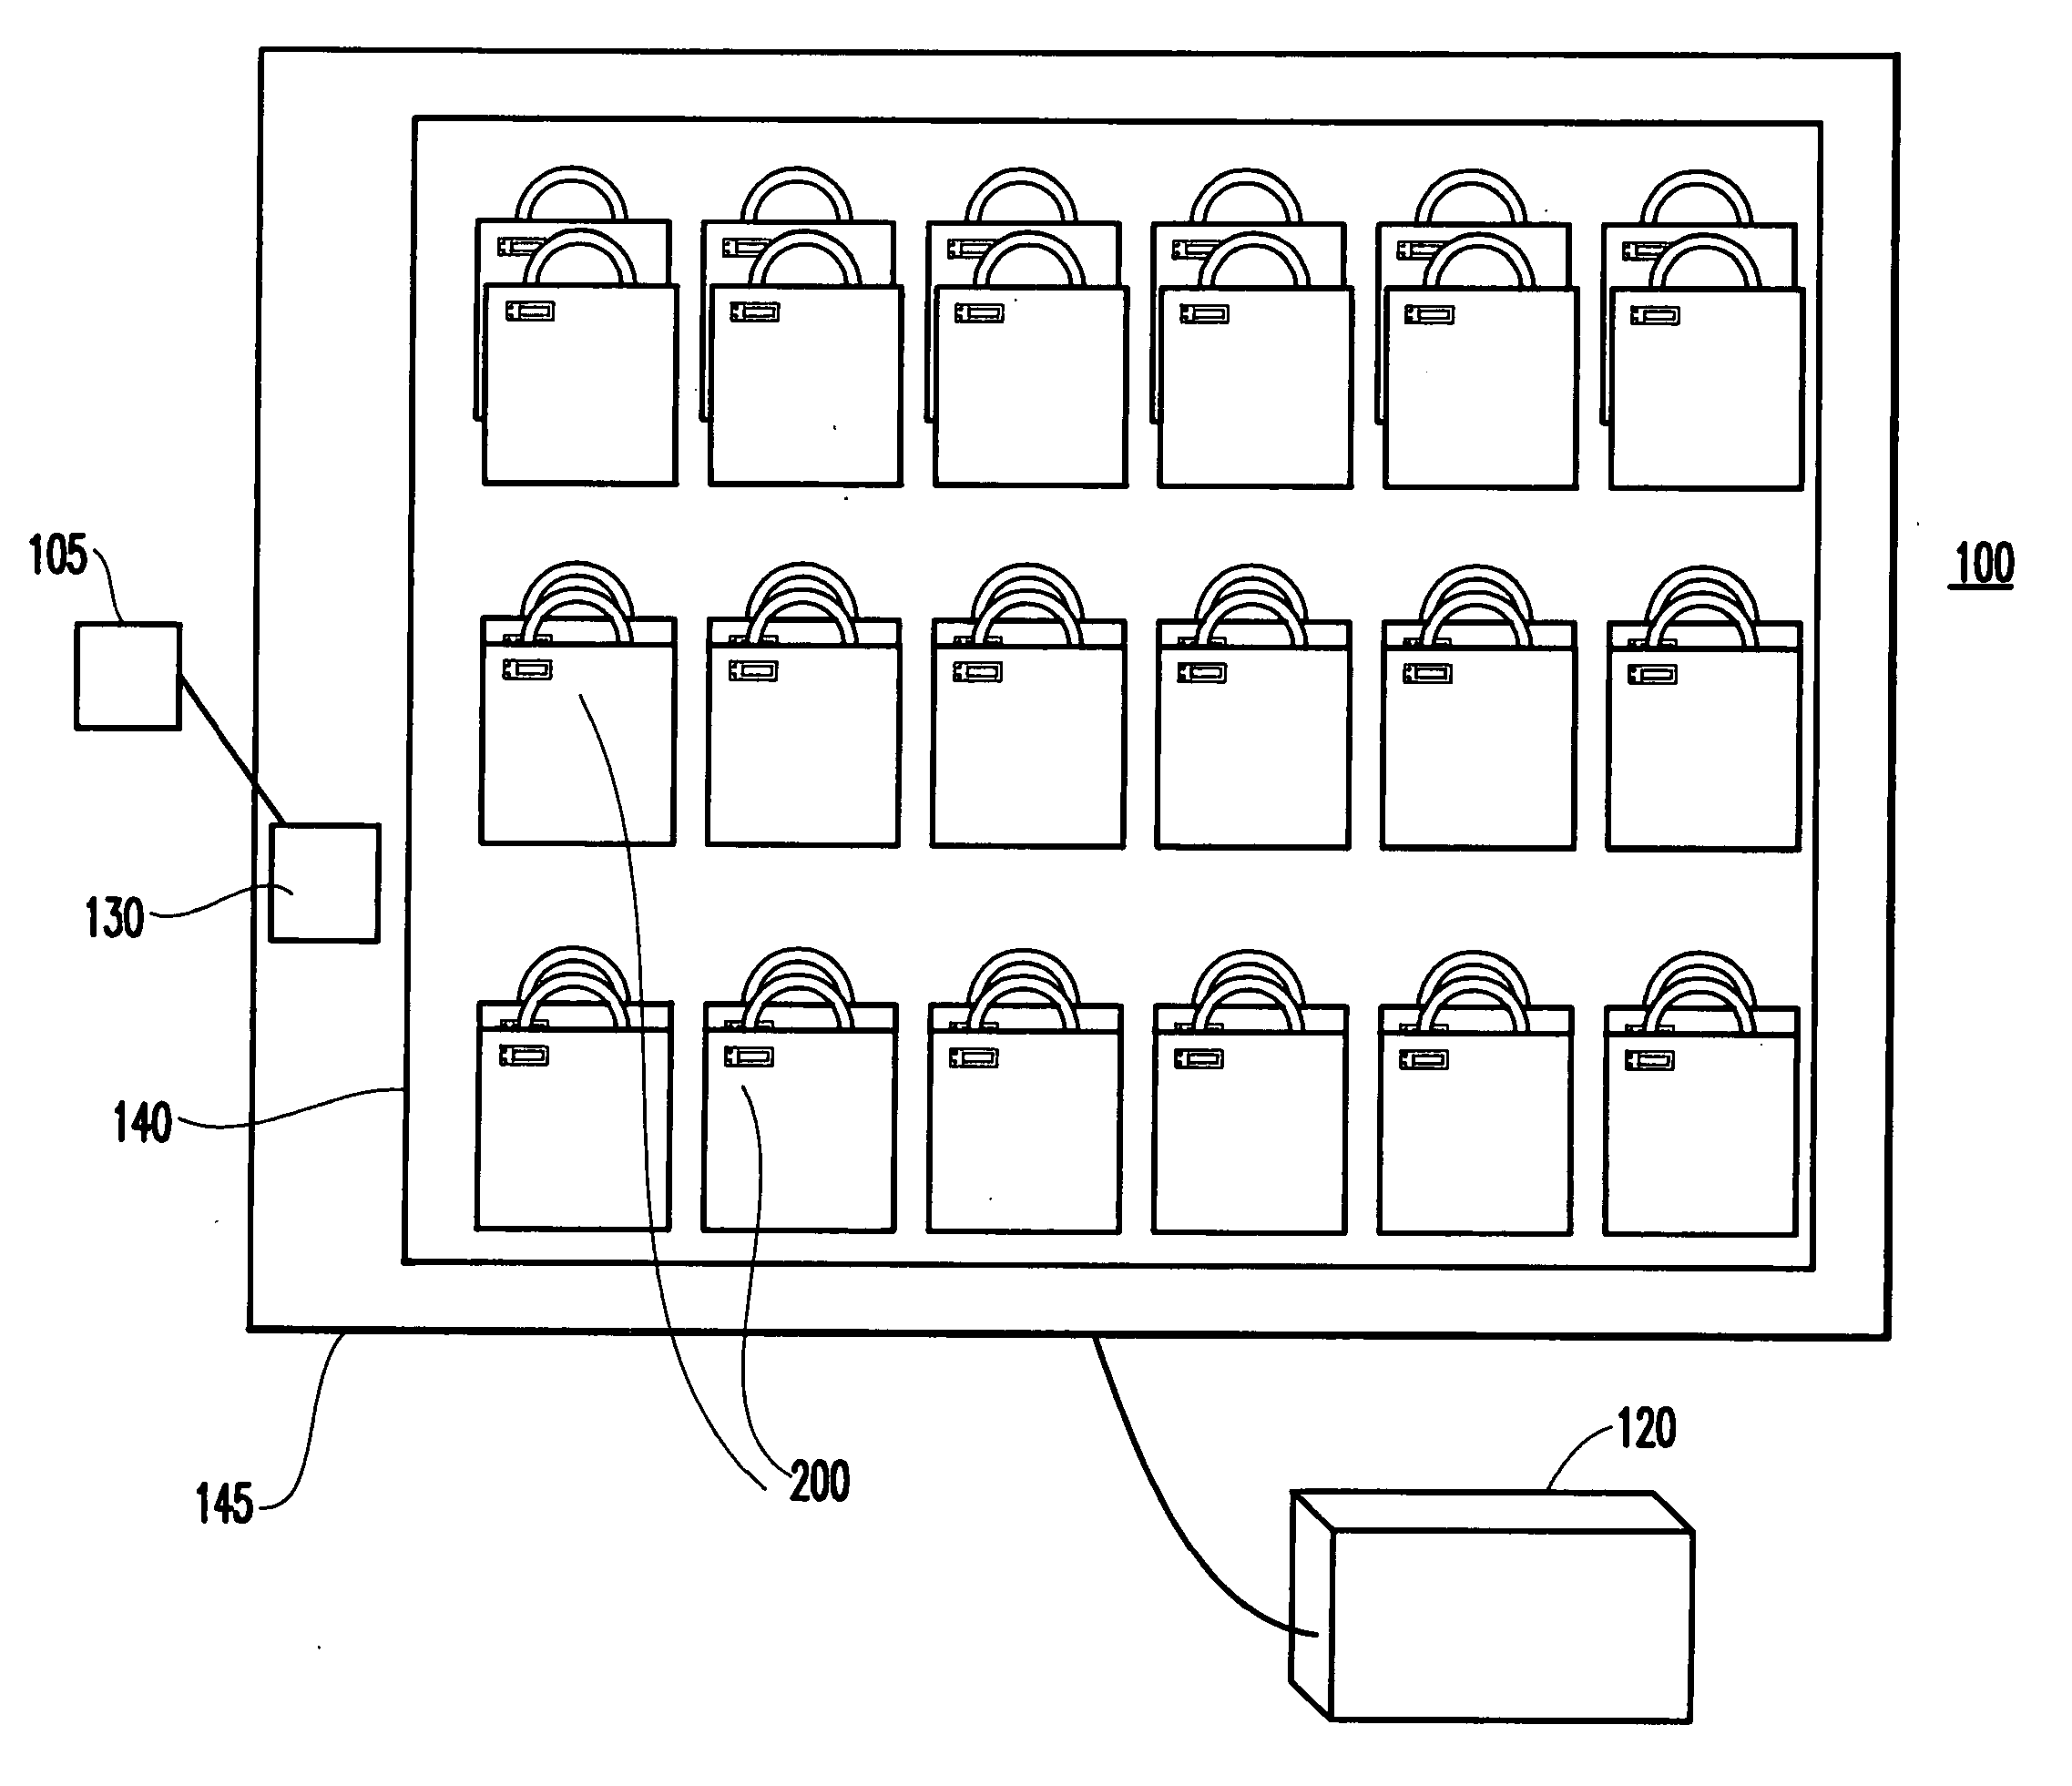 System and method for minimizing package delivery time